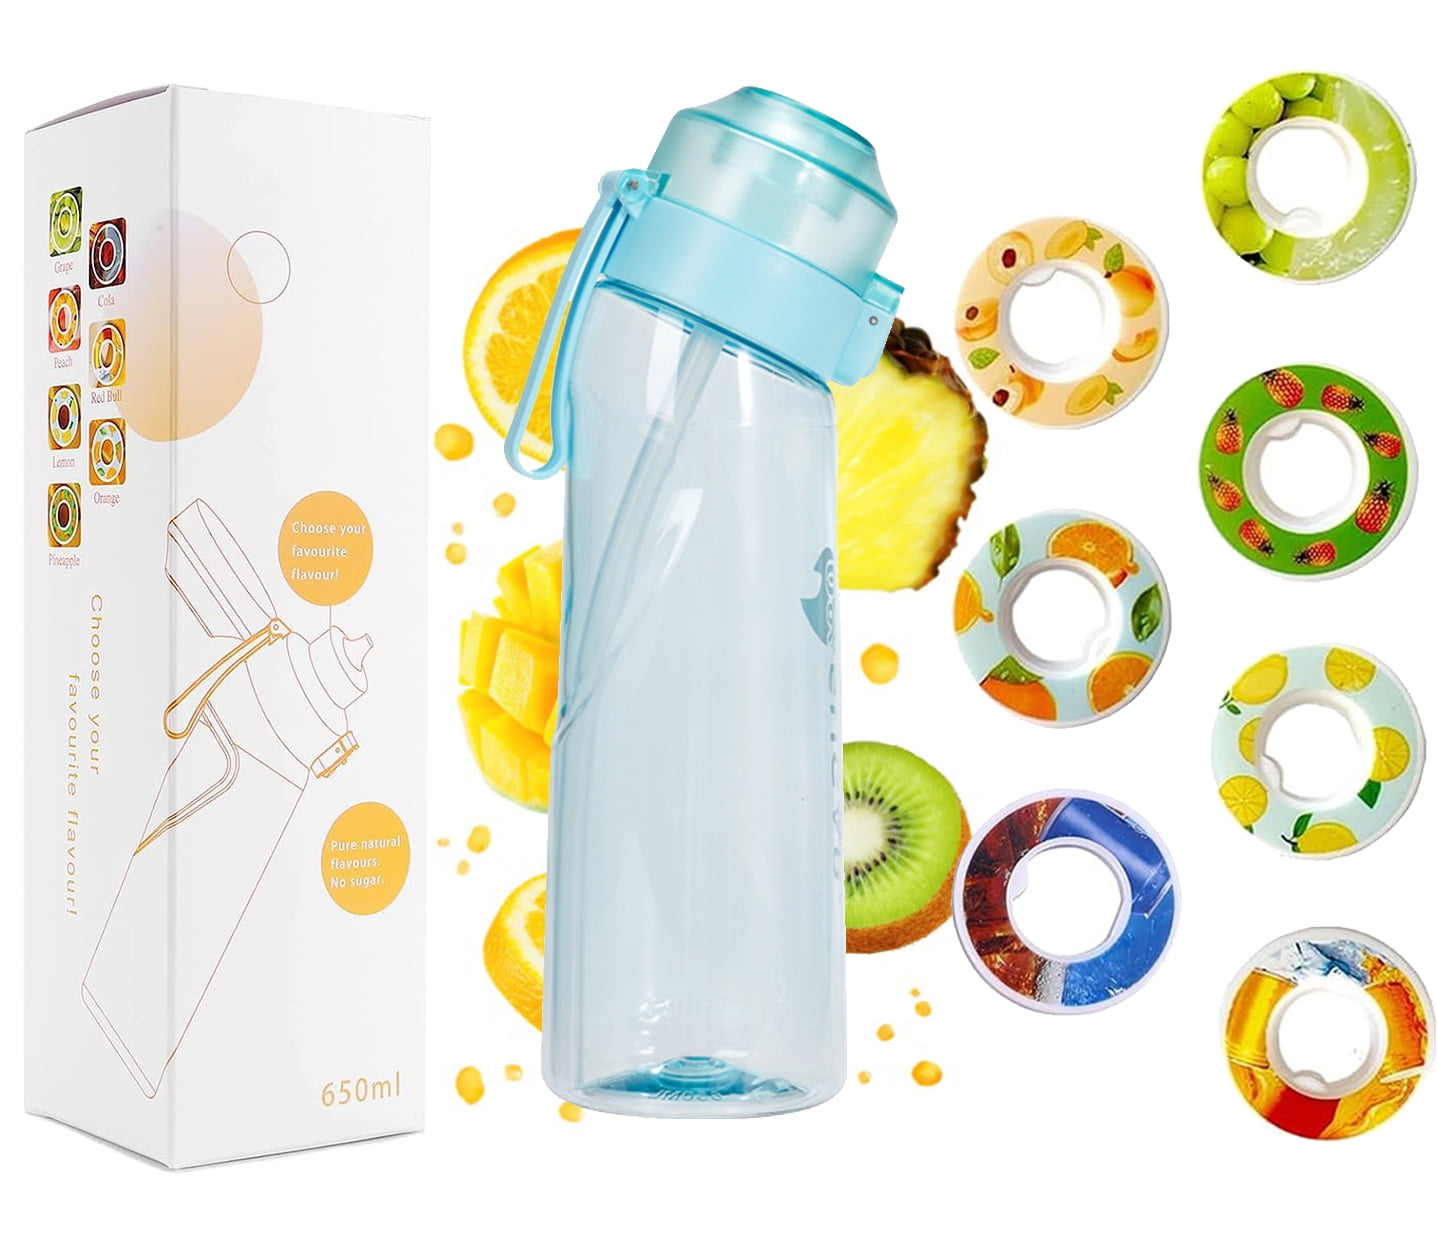 Air Water Bottle with 7 Flavor Pods, 650ML Fruit Fragrance Water Bottle, 0% Sugar Water Cup, Black